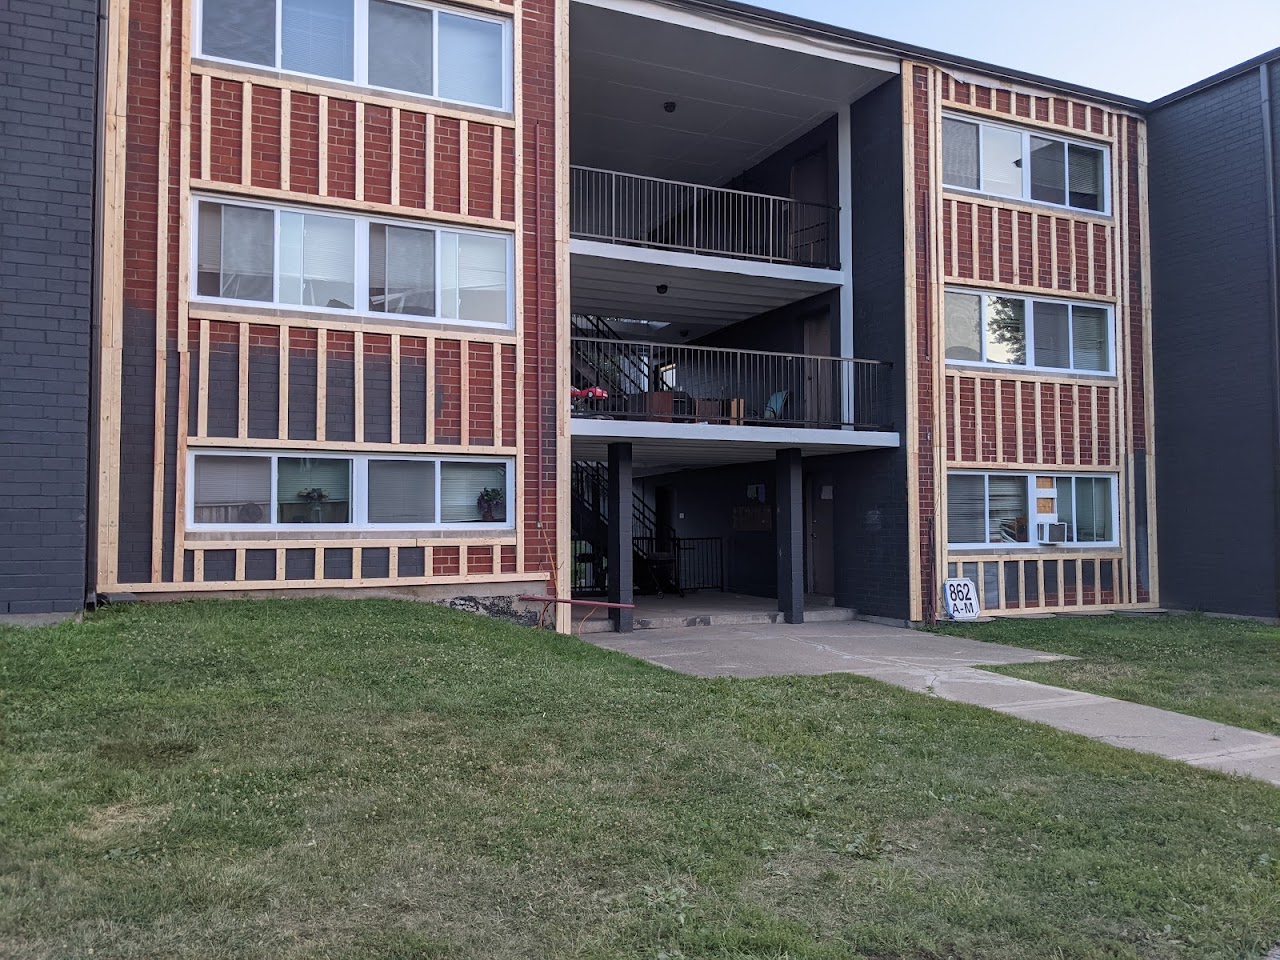 Photo of ARTS APARTMENTS AT MUSIC HALL. Affordable housing located at 845 EZZARD CHARLES DRIVE CINCINNATI, OH 45203